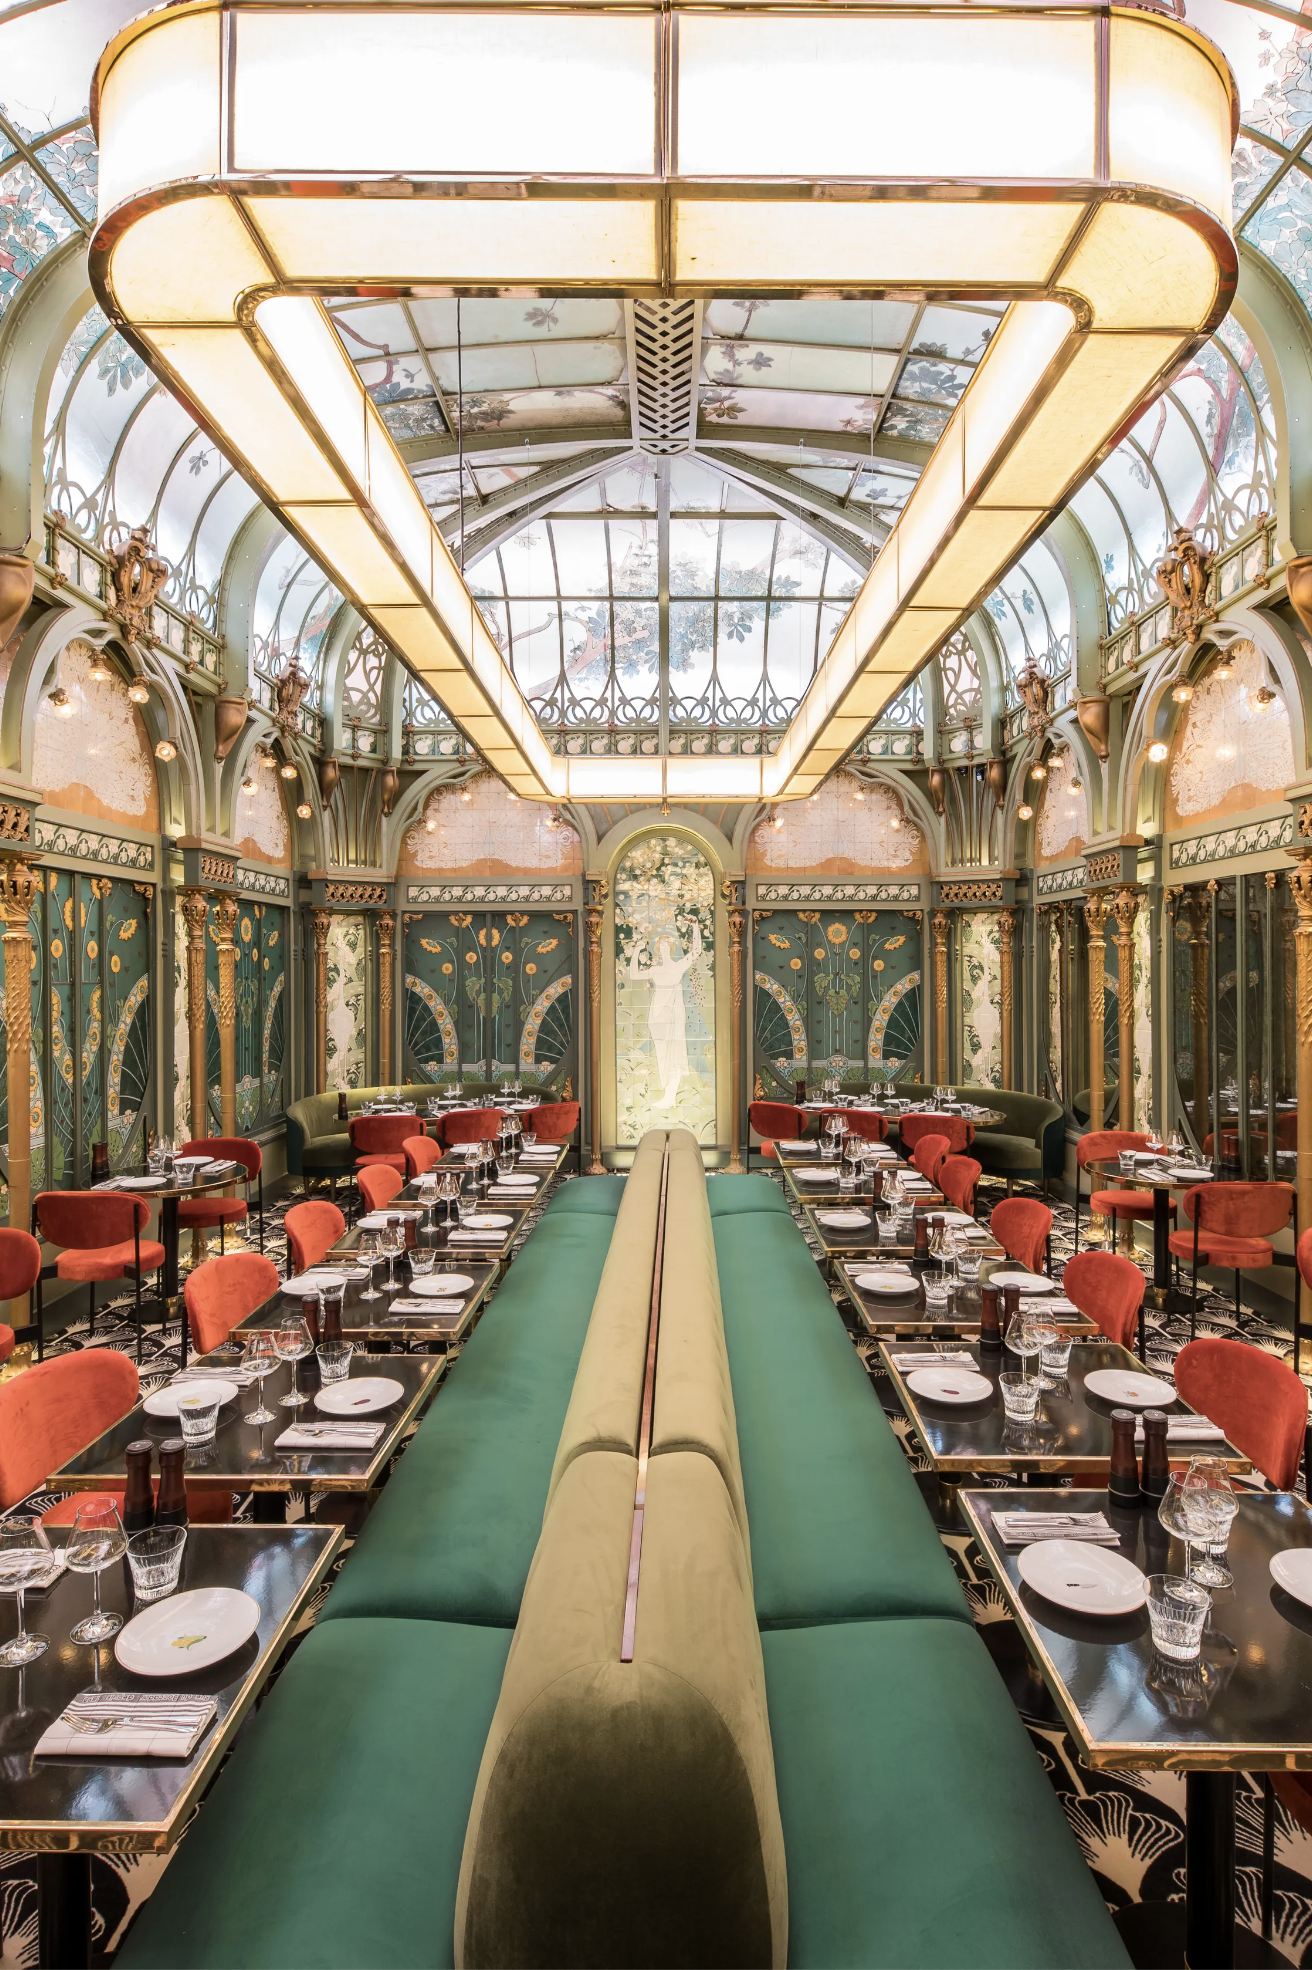 the dramatic Art Nouveau interiors of Beefbar Paris with olive green and ruby red velvet banquette seating, tile mosaics and a vaulted glass atrium ceiling